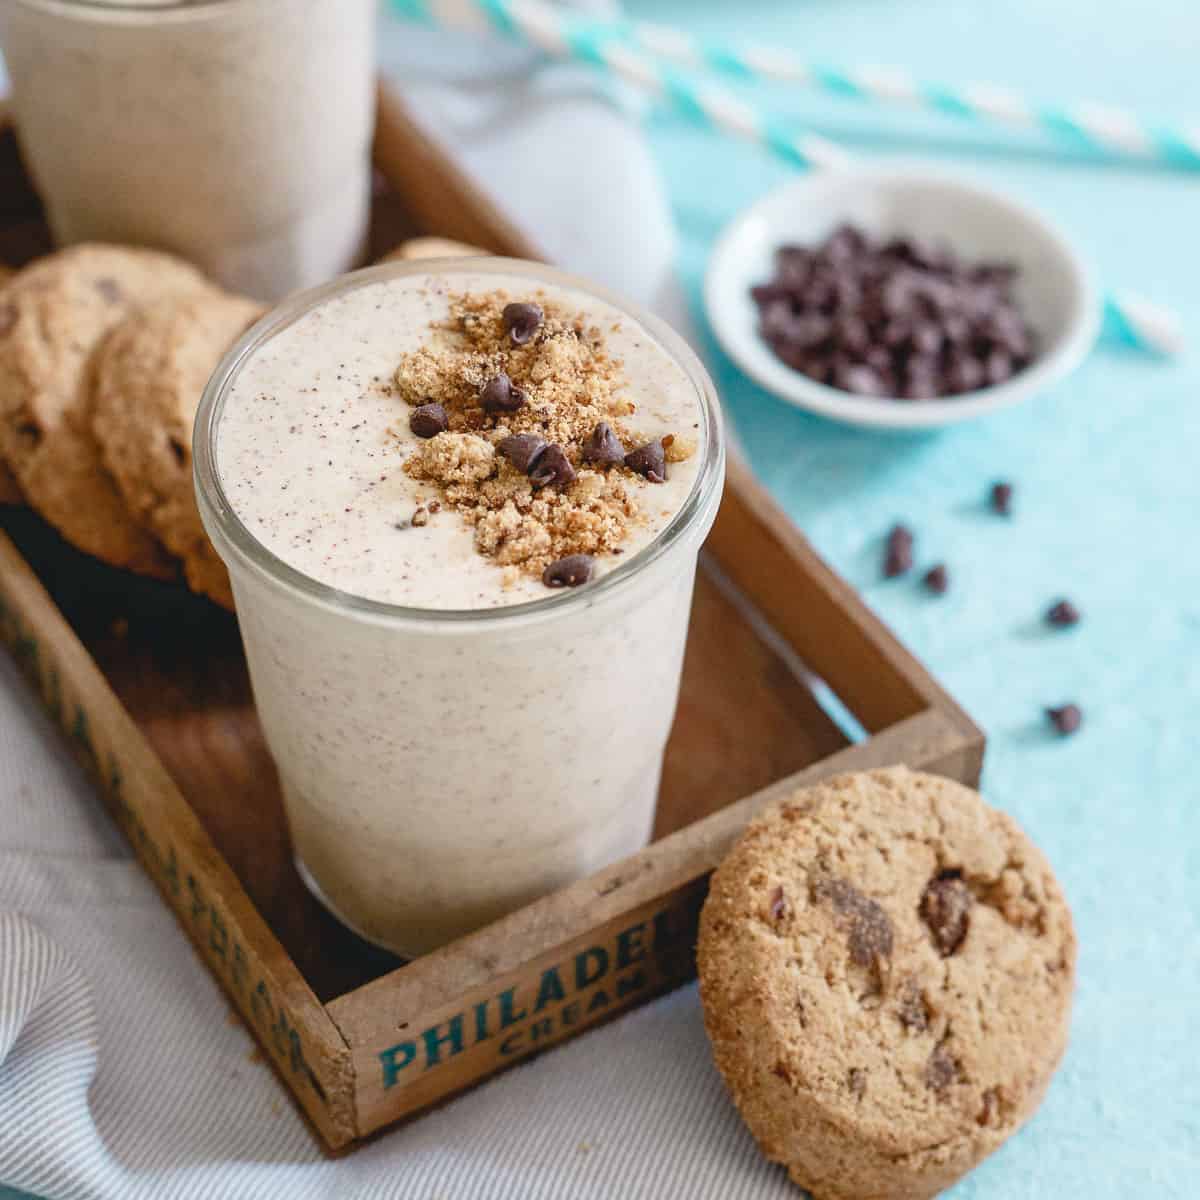 Creamy cashew butter is the secret ingredient to this healthier chocolate chip cookie milkshake. Gives it that decadent cookie dough like taste!